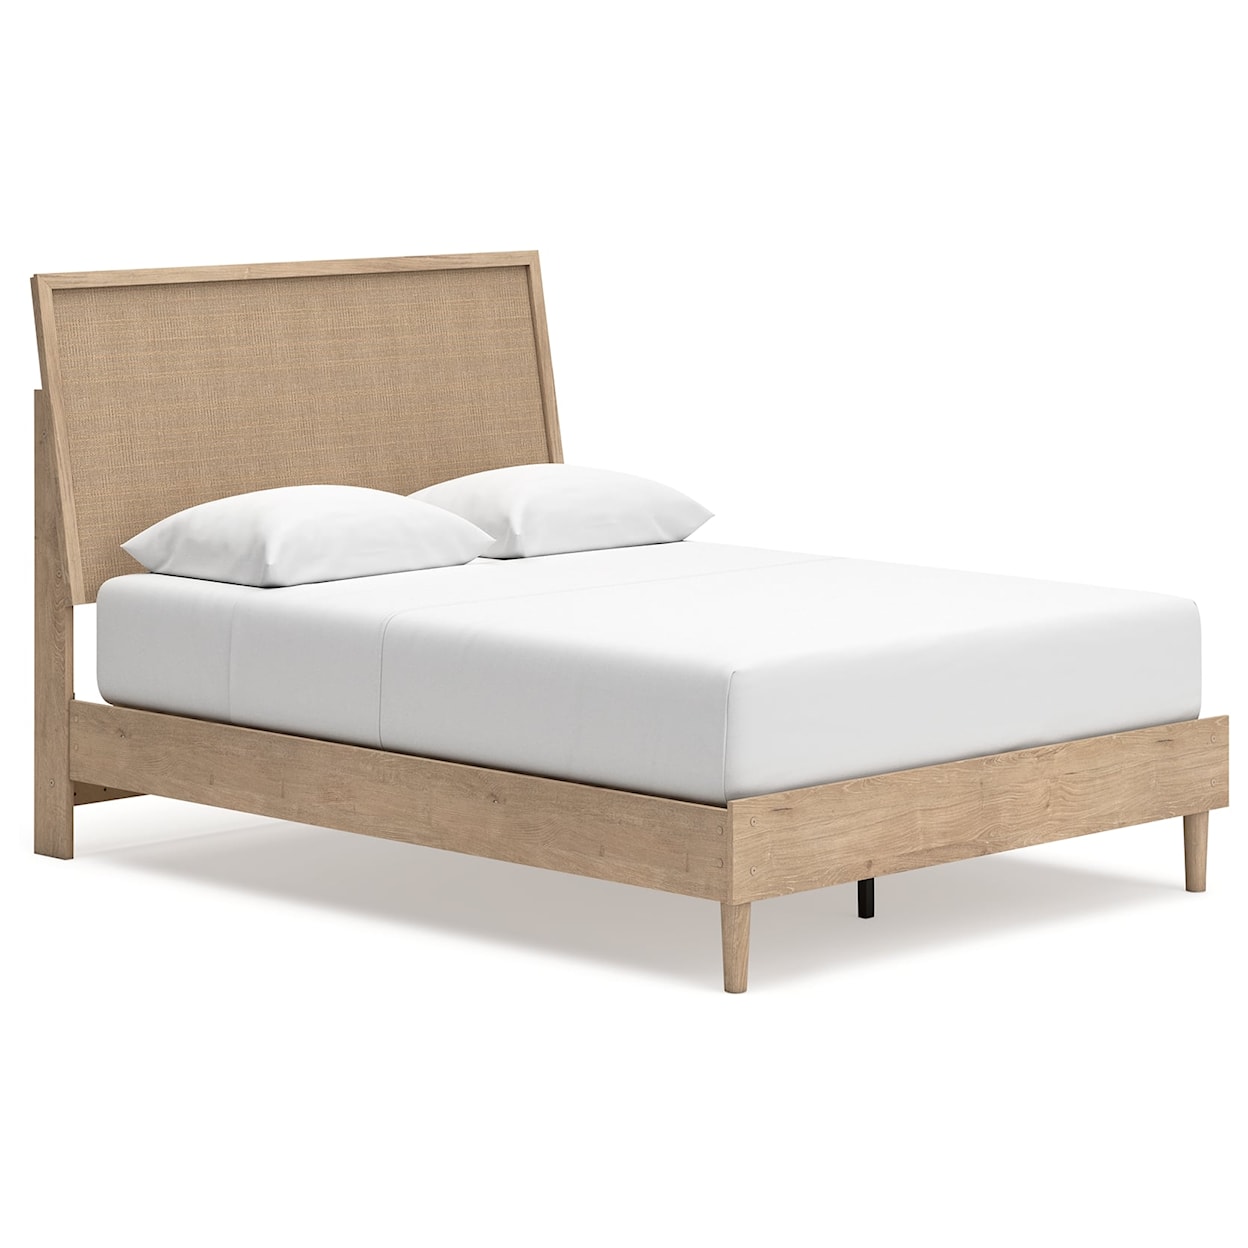 Signature Design by Ashley Cielden Queen Panel Bed